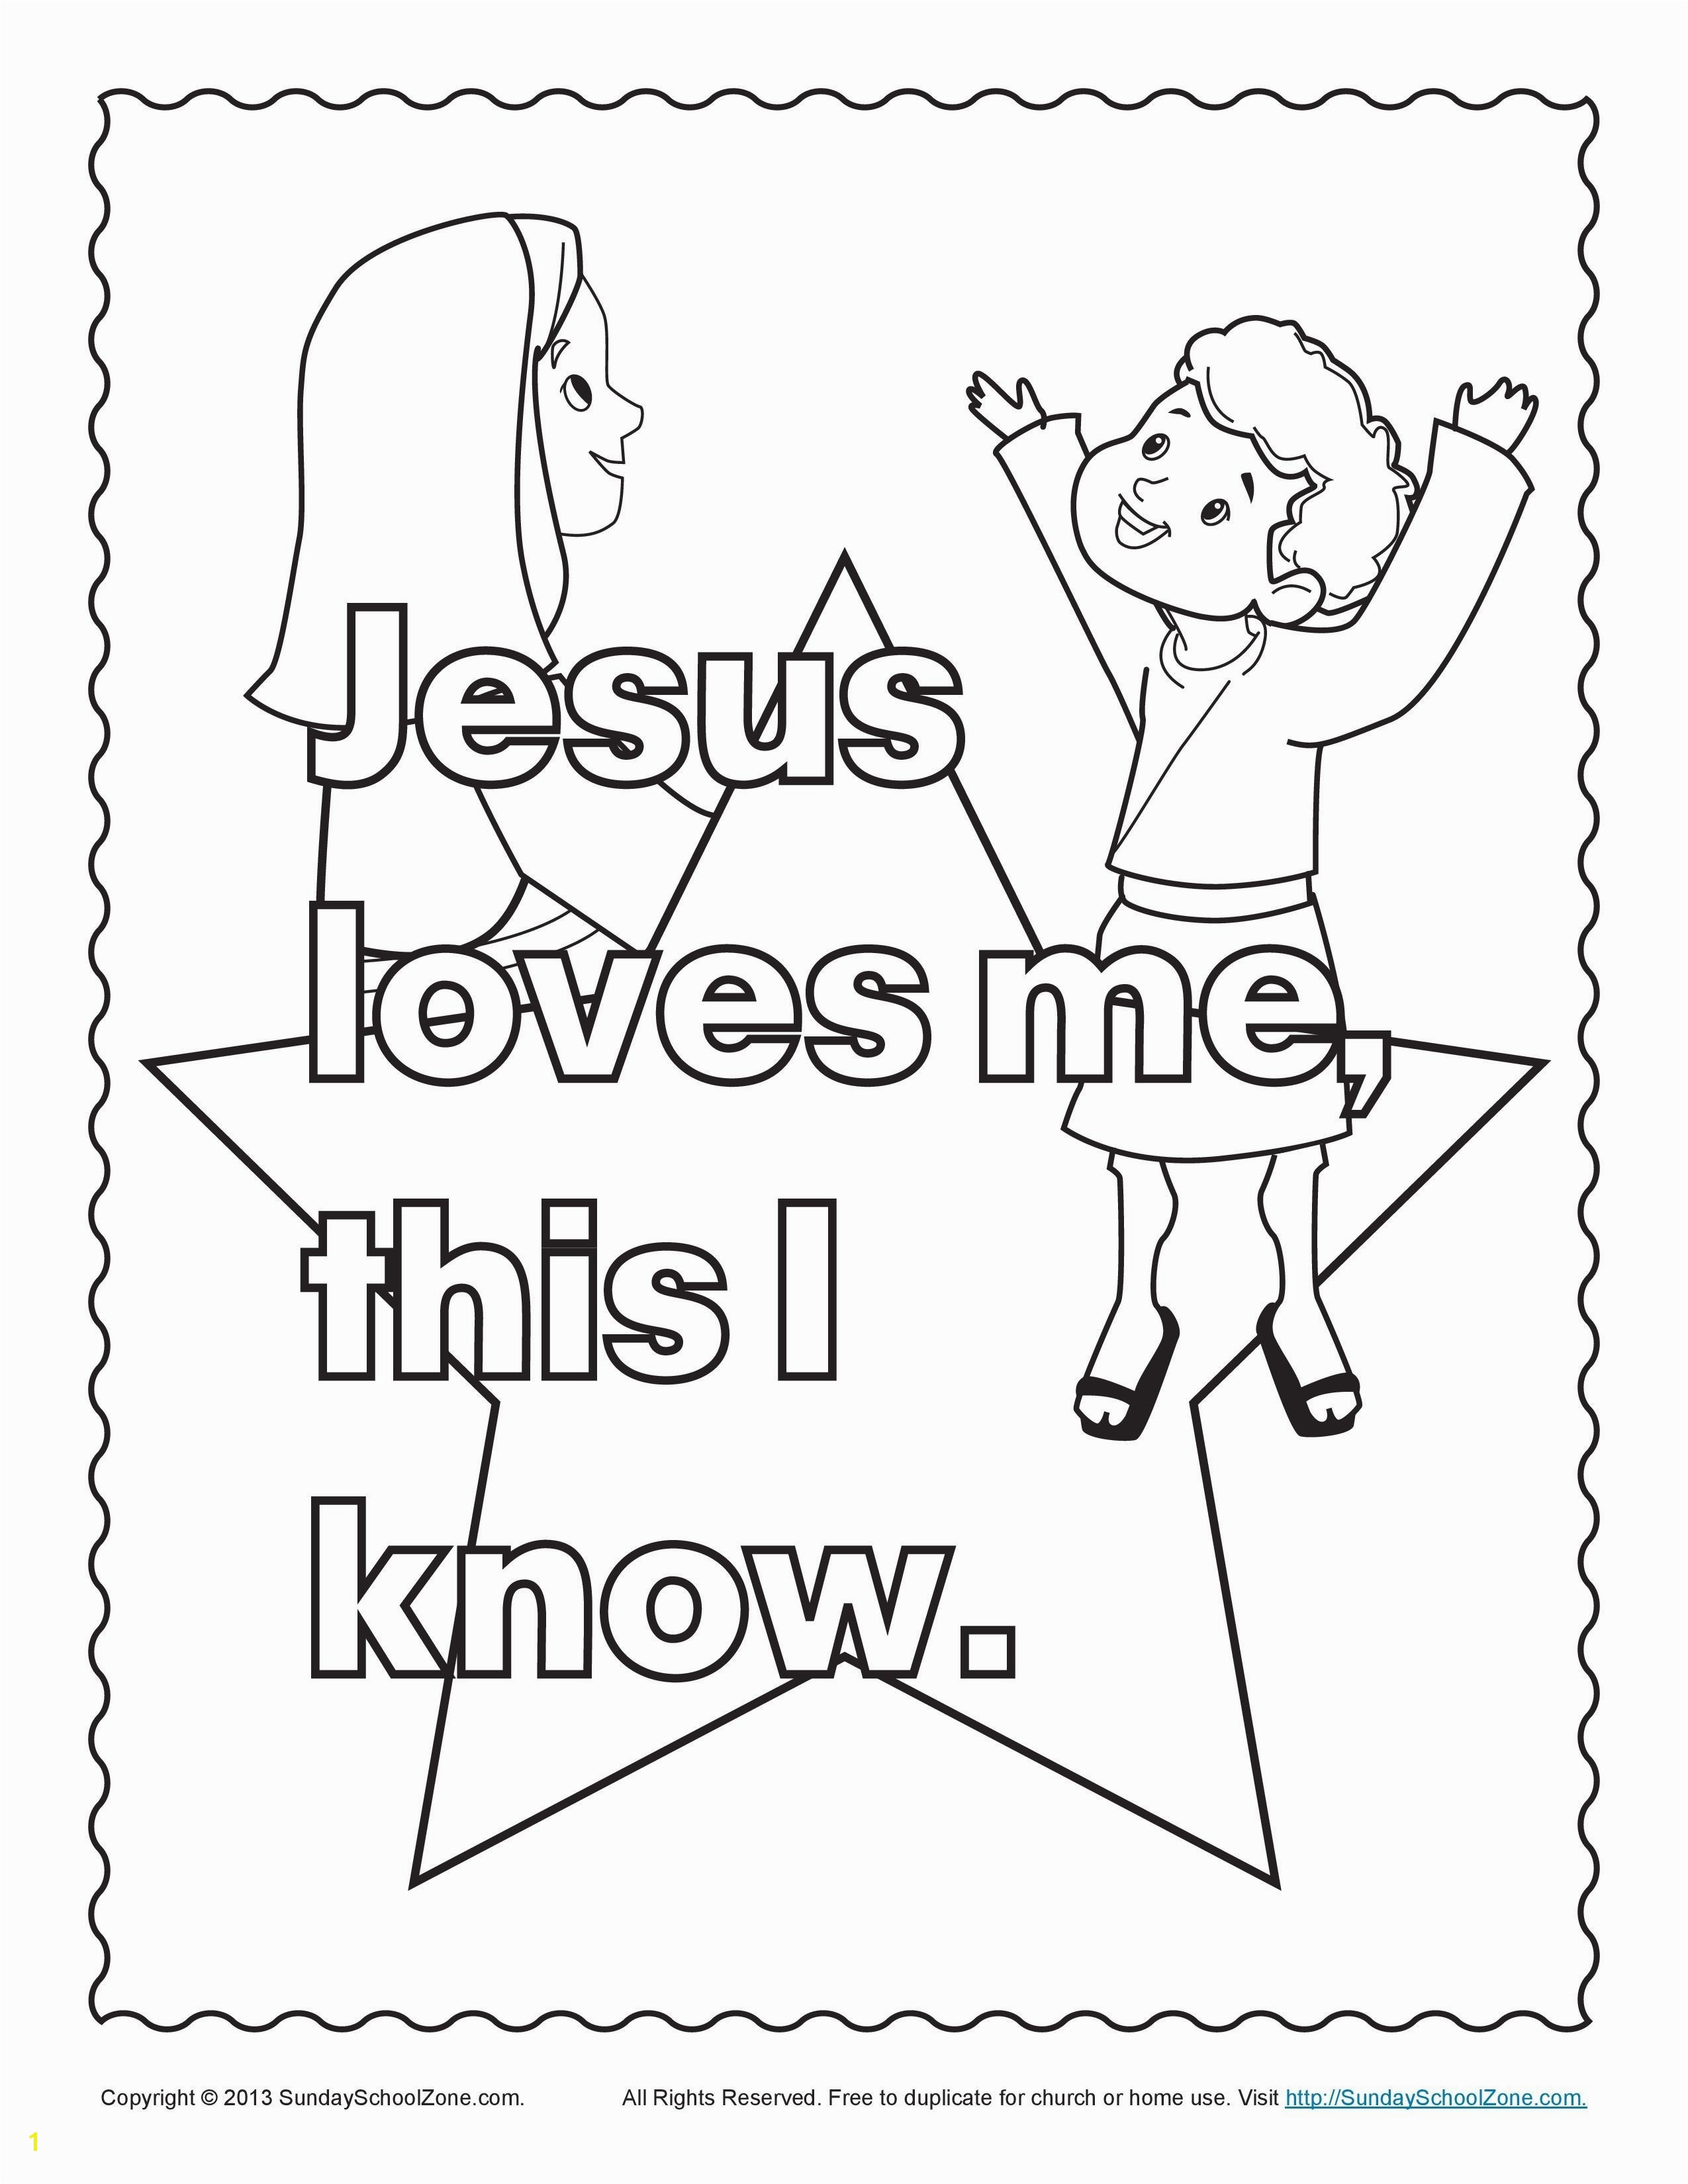 Free Printable Jesus Coloring Pages Save Imagination Free Printable Bible Coloring Pages for Preschoolers